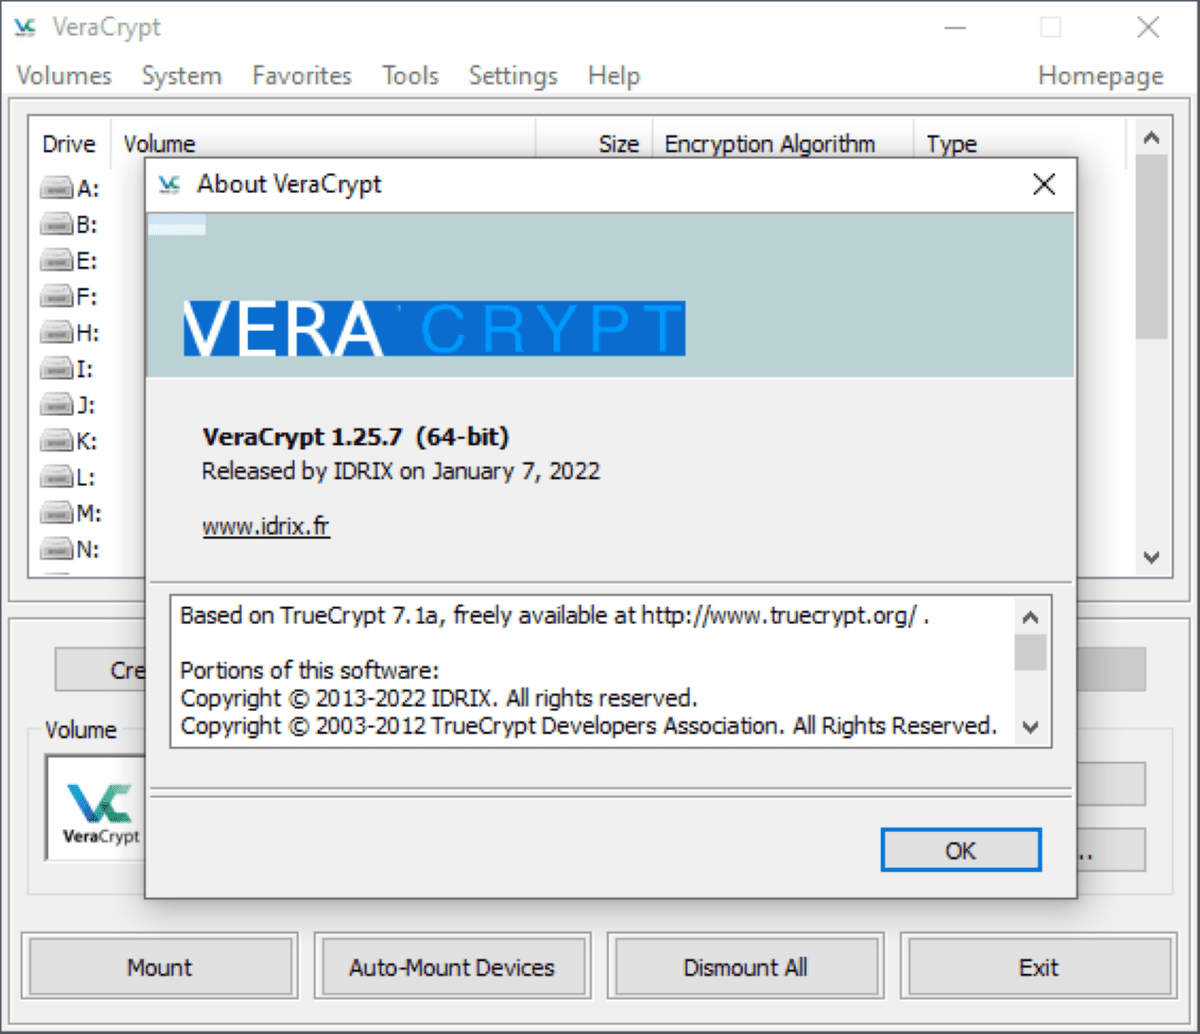 VeraCrypt 1.25.7 update reintroduces support for Windows Vista, 7 and 8 systems